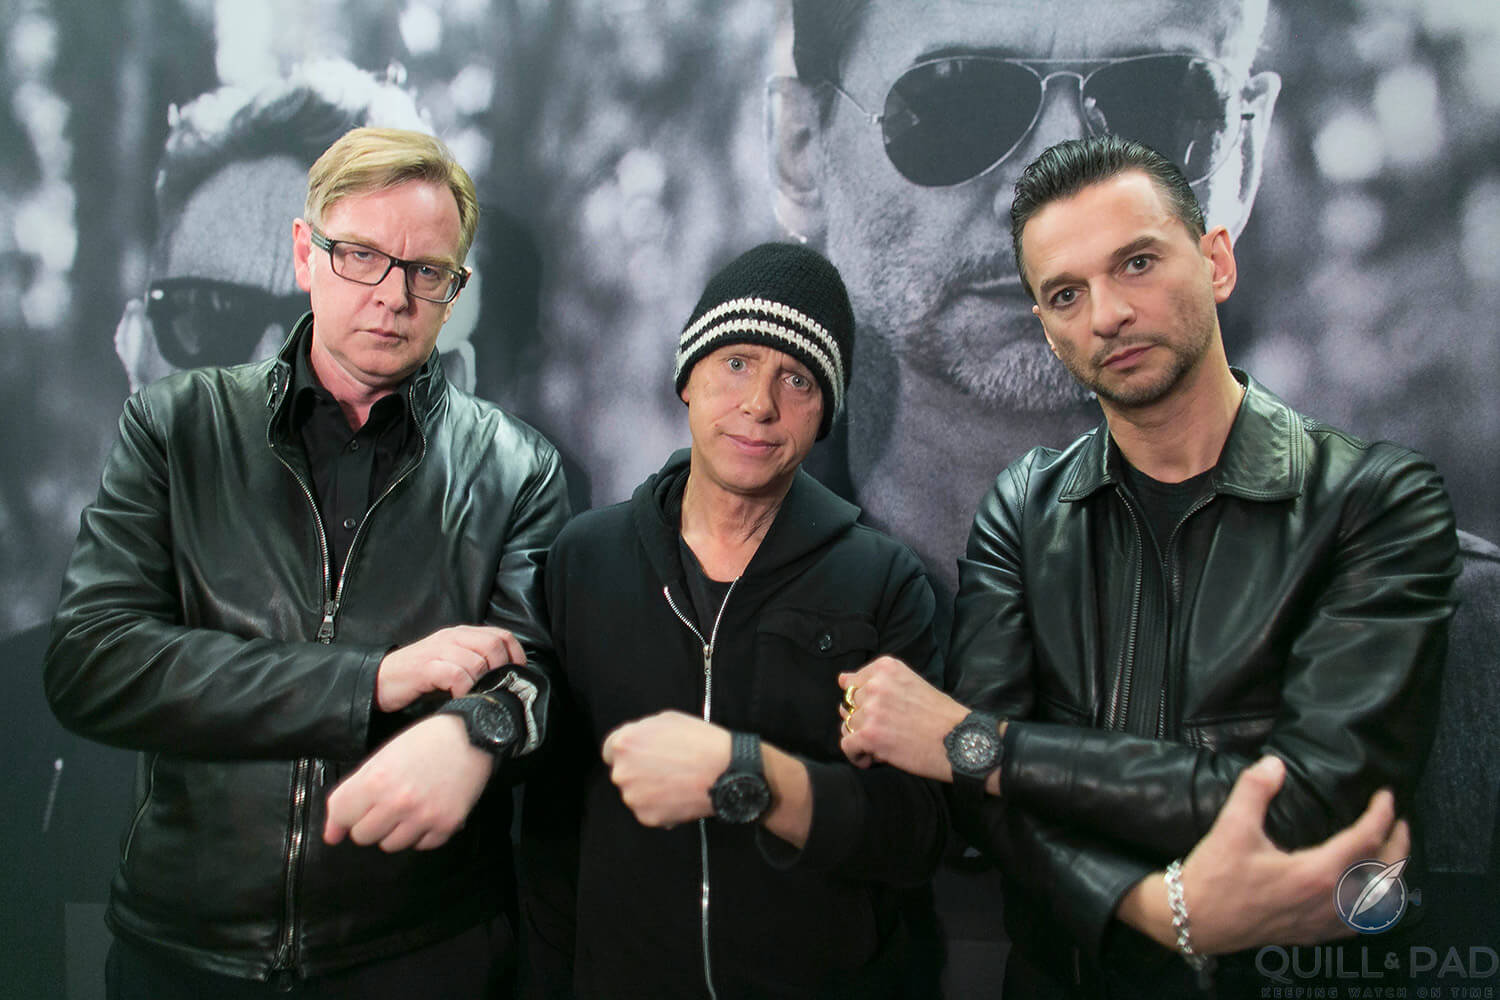 Depeche Mode wearing limited edition Hublots in their honor